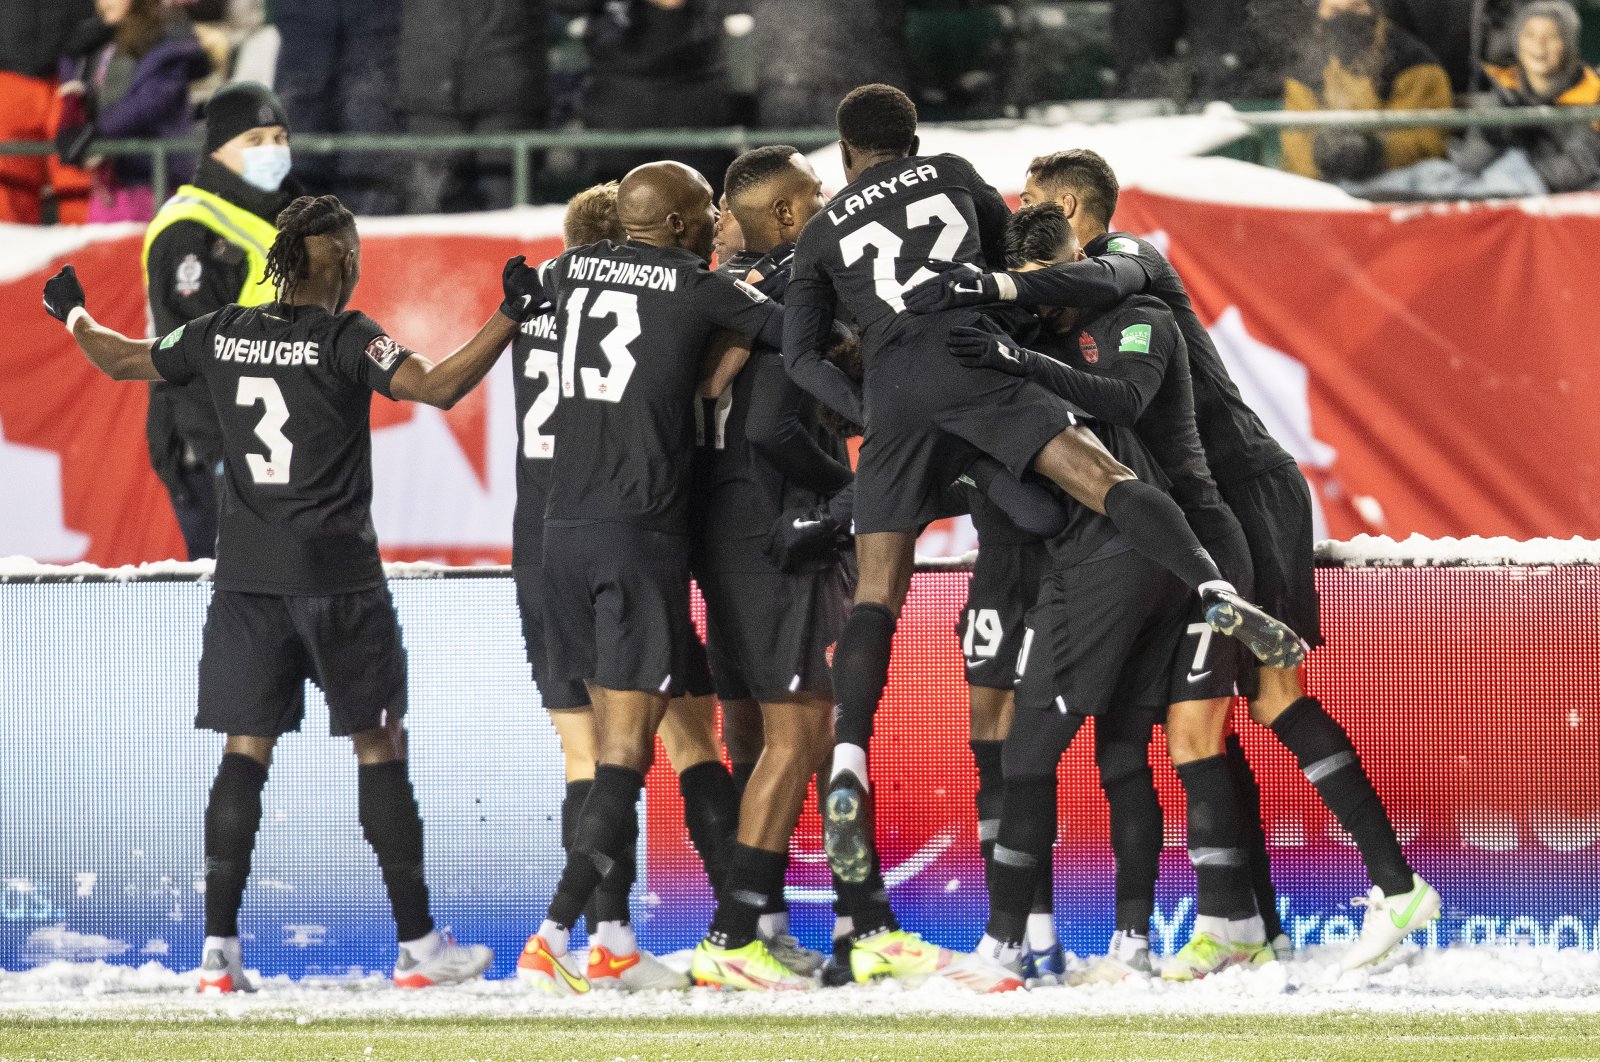 Canada players celebrate a goal against Mexico during a FIFA World Cup qualifying soccer match against Canada, in Edmonton, Alberta, Nov. 16, 2021. (AP Photo)